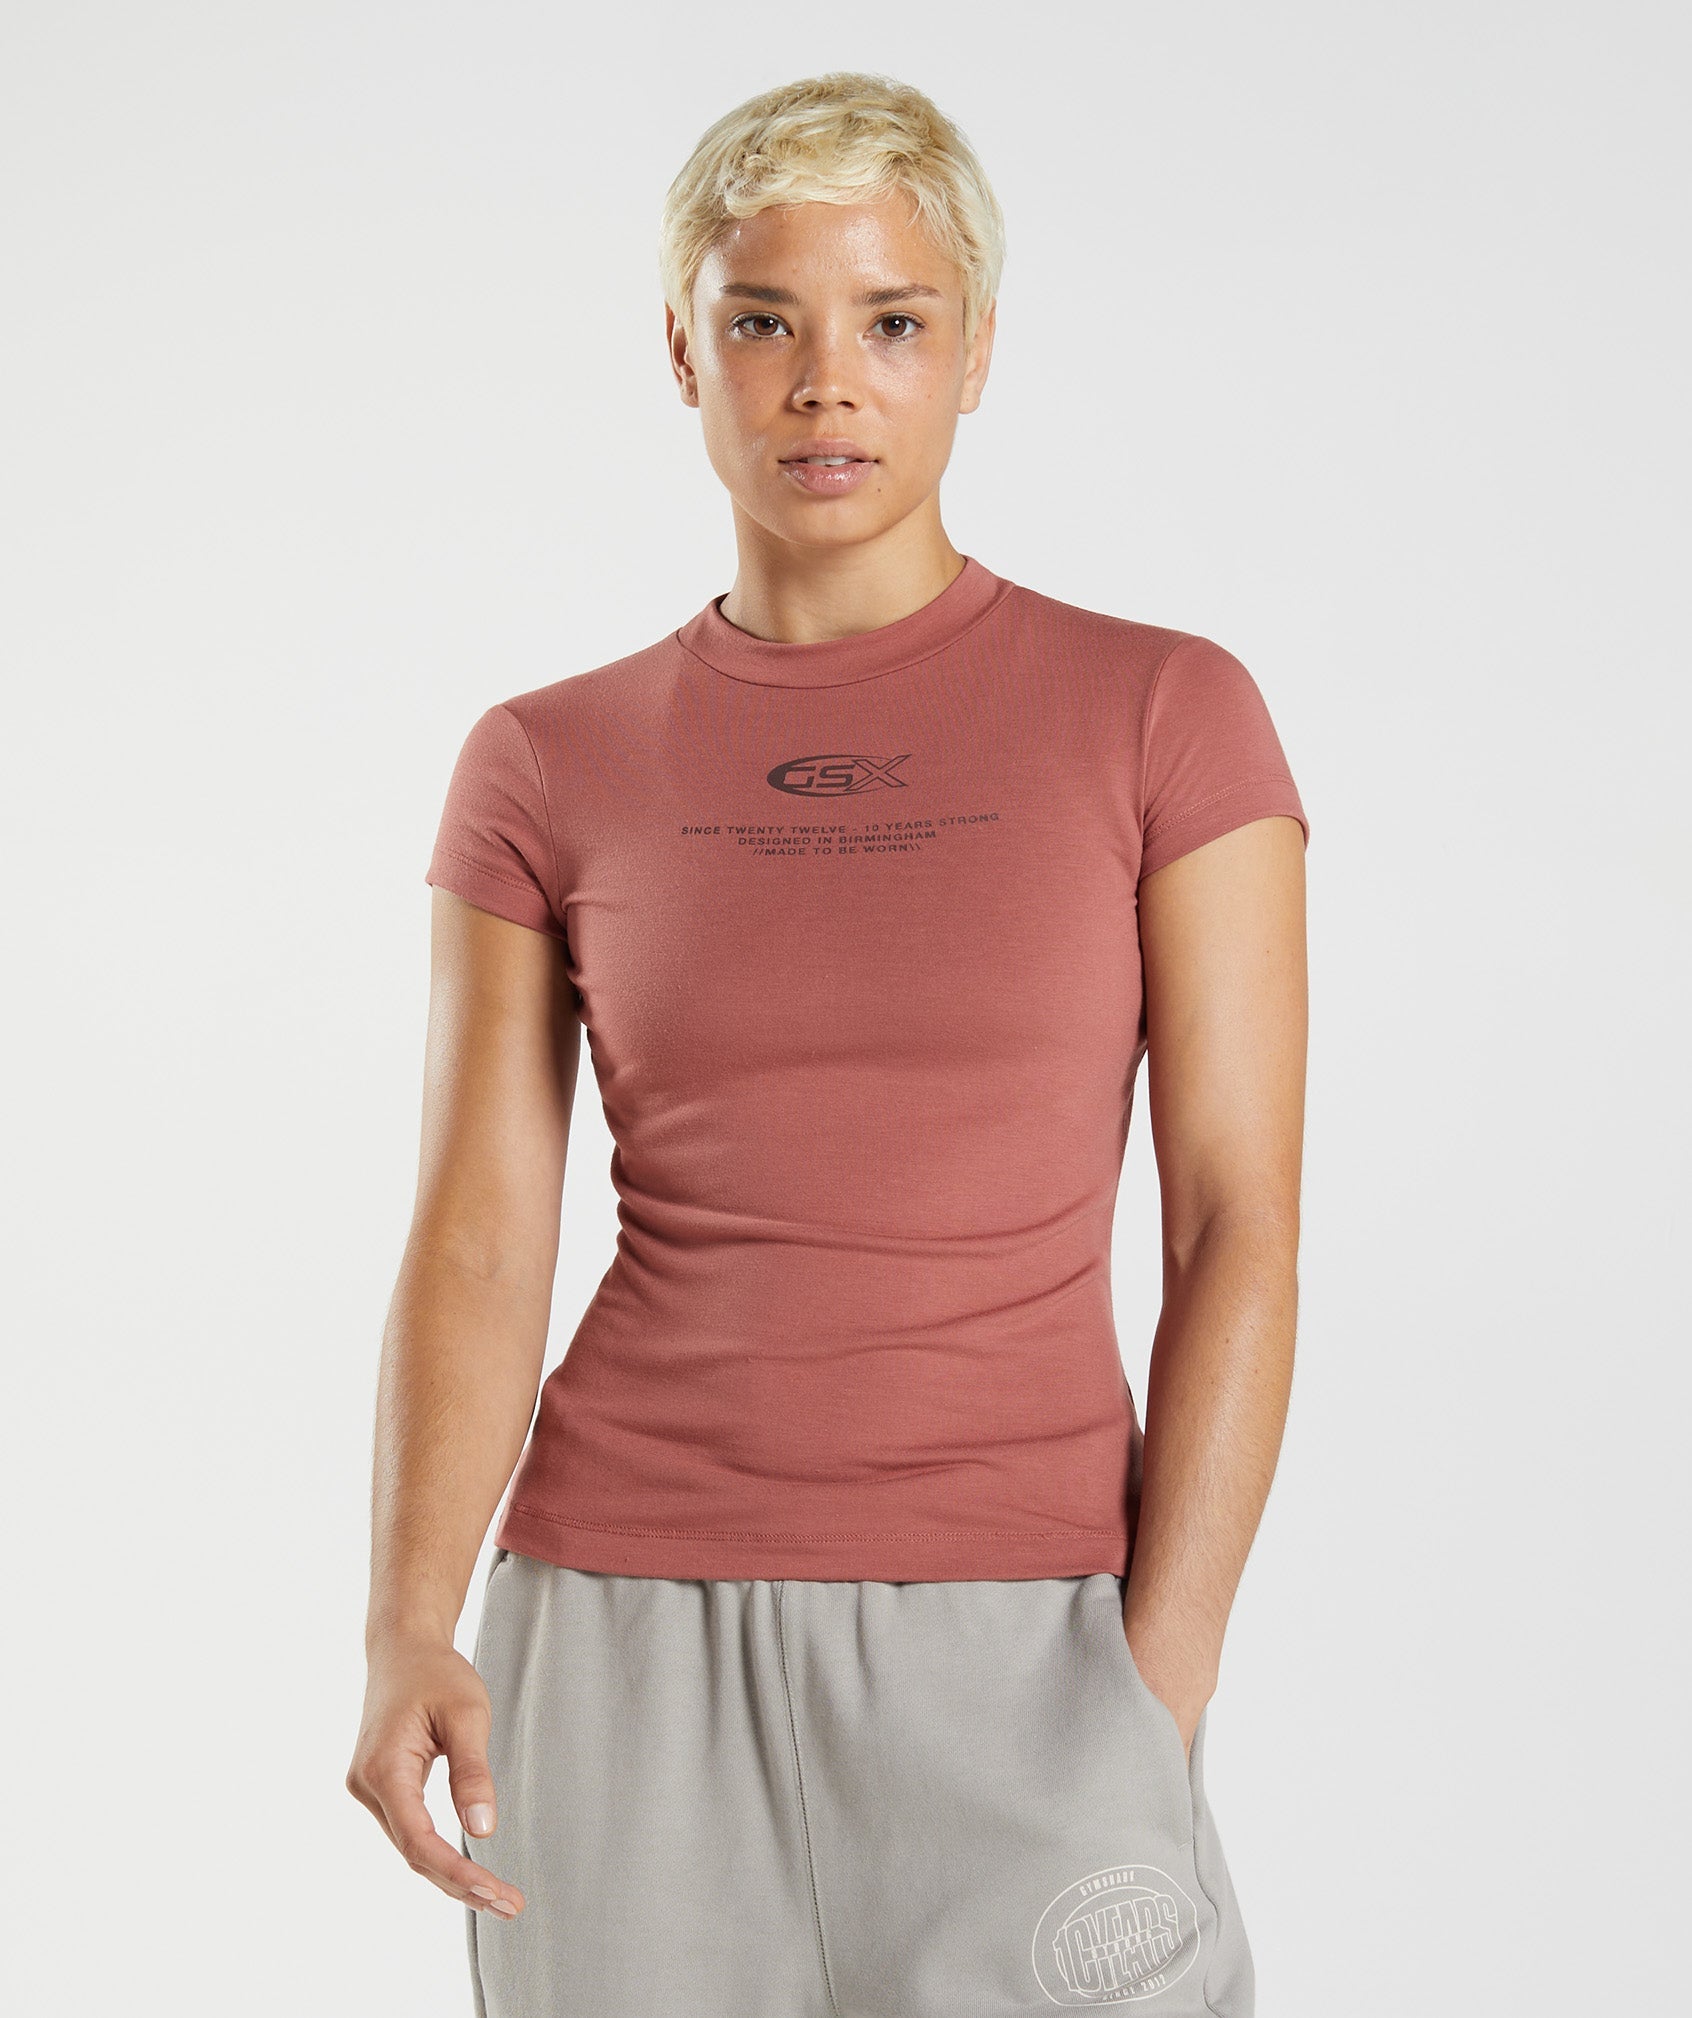 GS10 Year Body Fit T-Shirt in Rose Brown - view 1